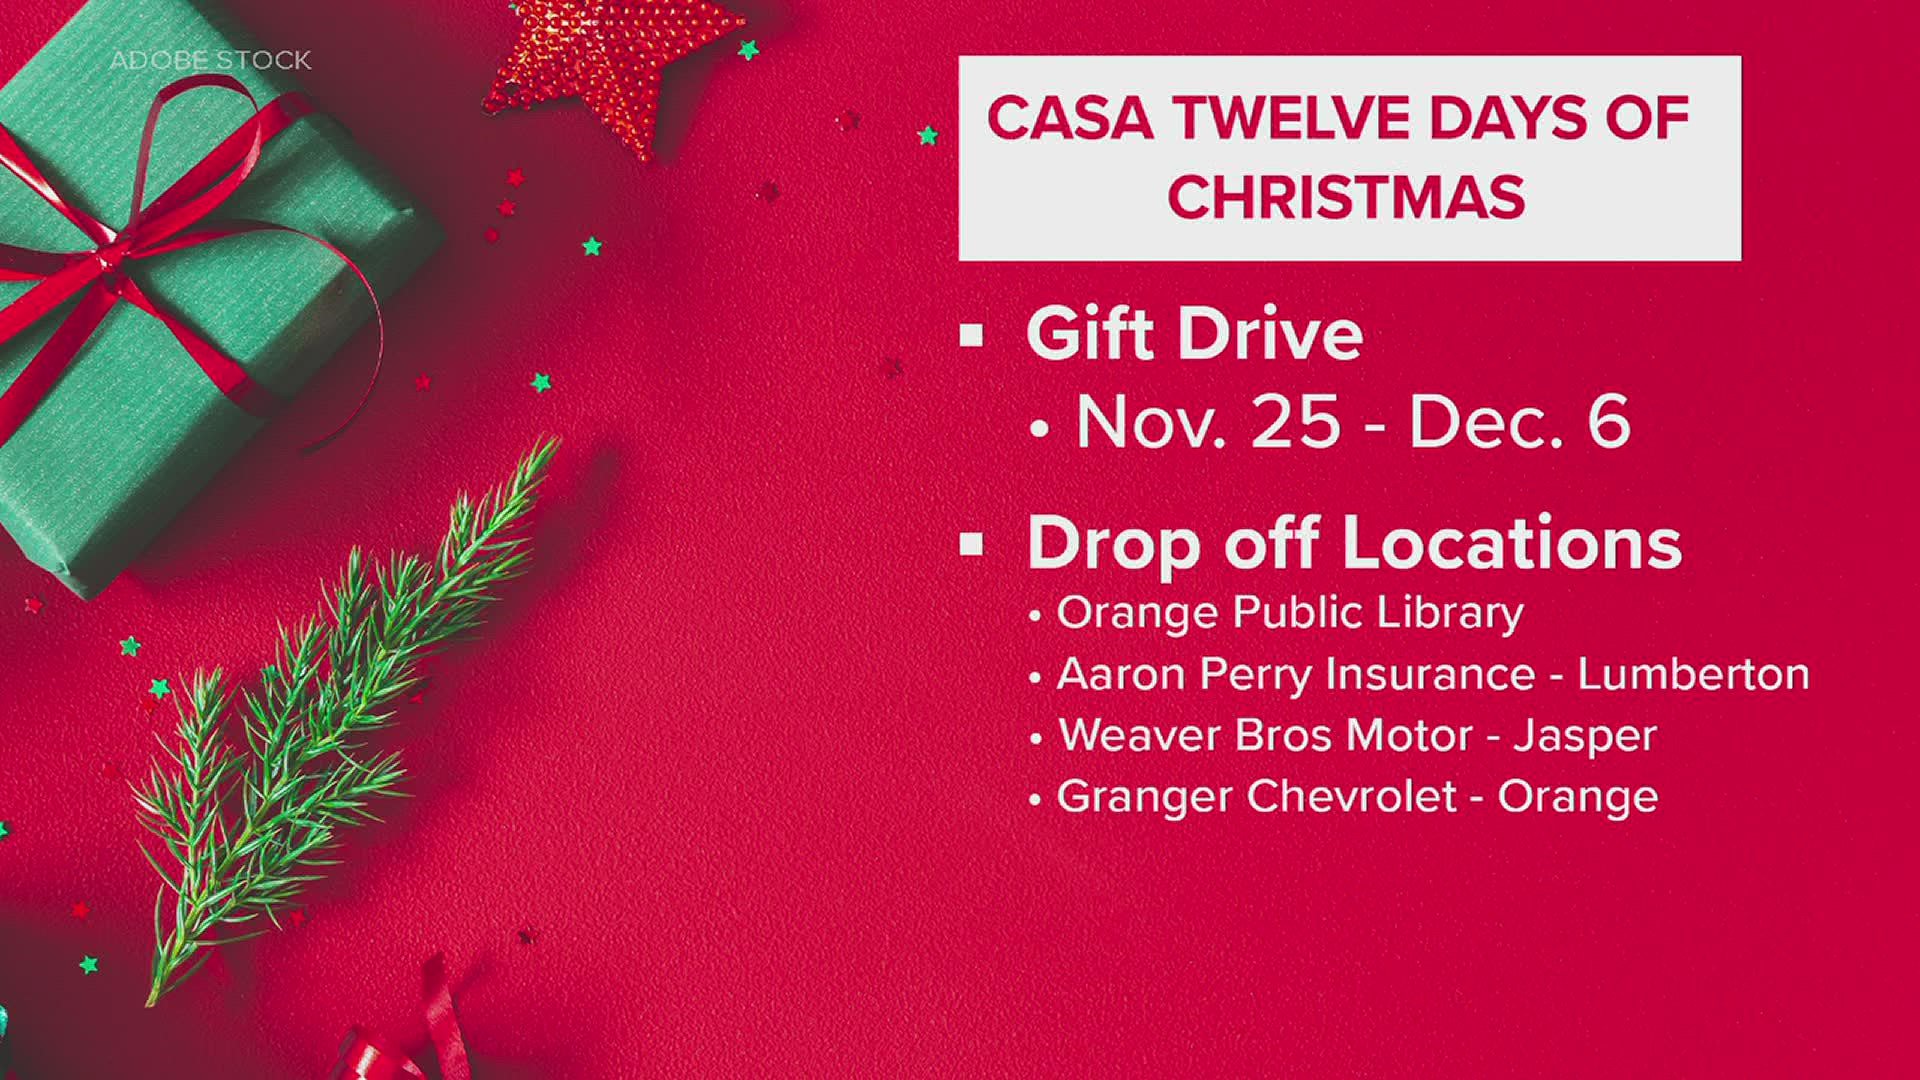 The donations from the gift drive will go to children served by CASA.